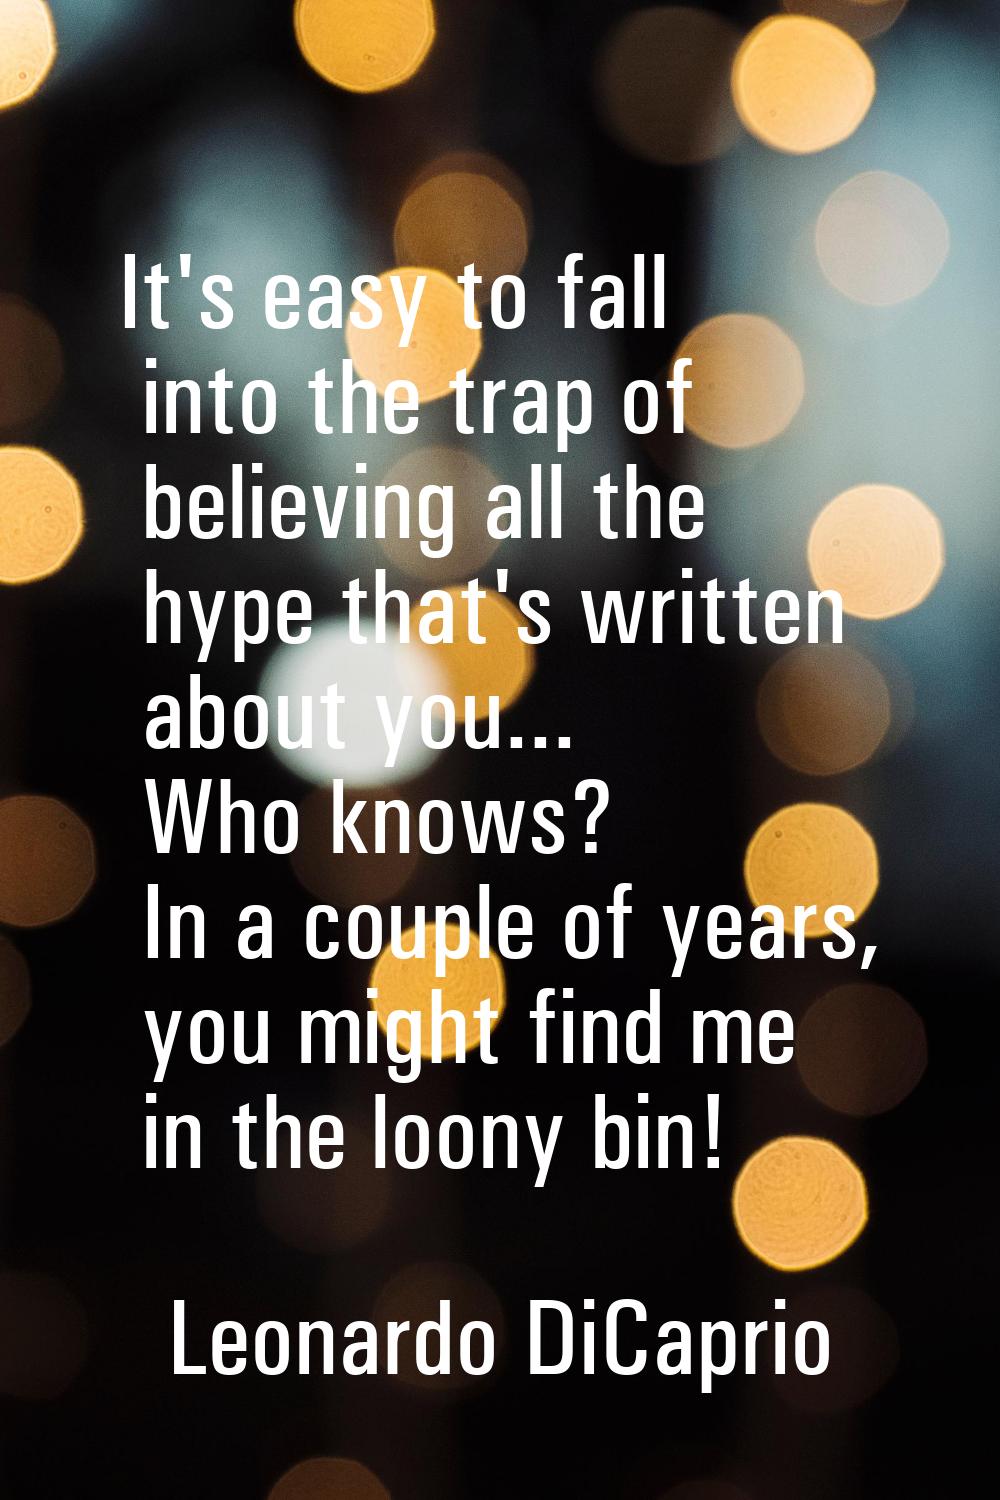 It's easy to fall into the trap of believing all the hype that's written about you... Who knows? In